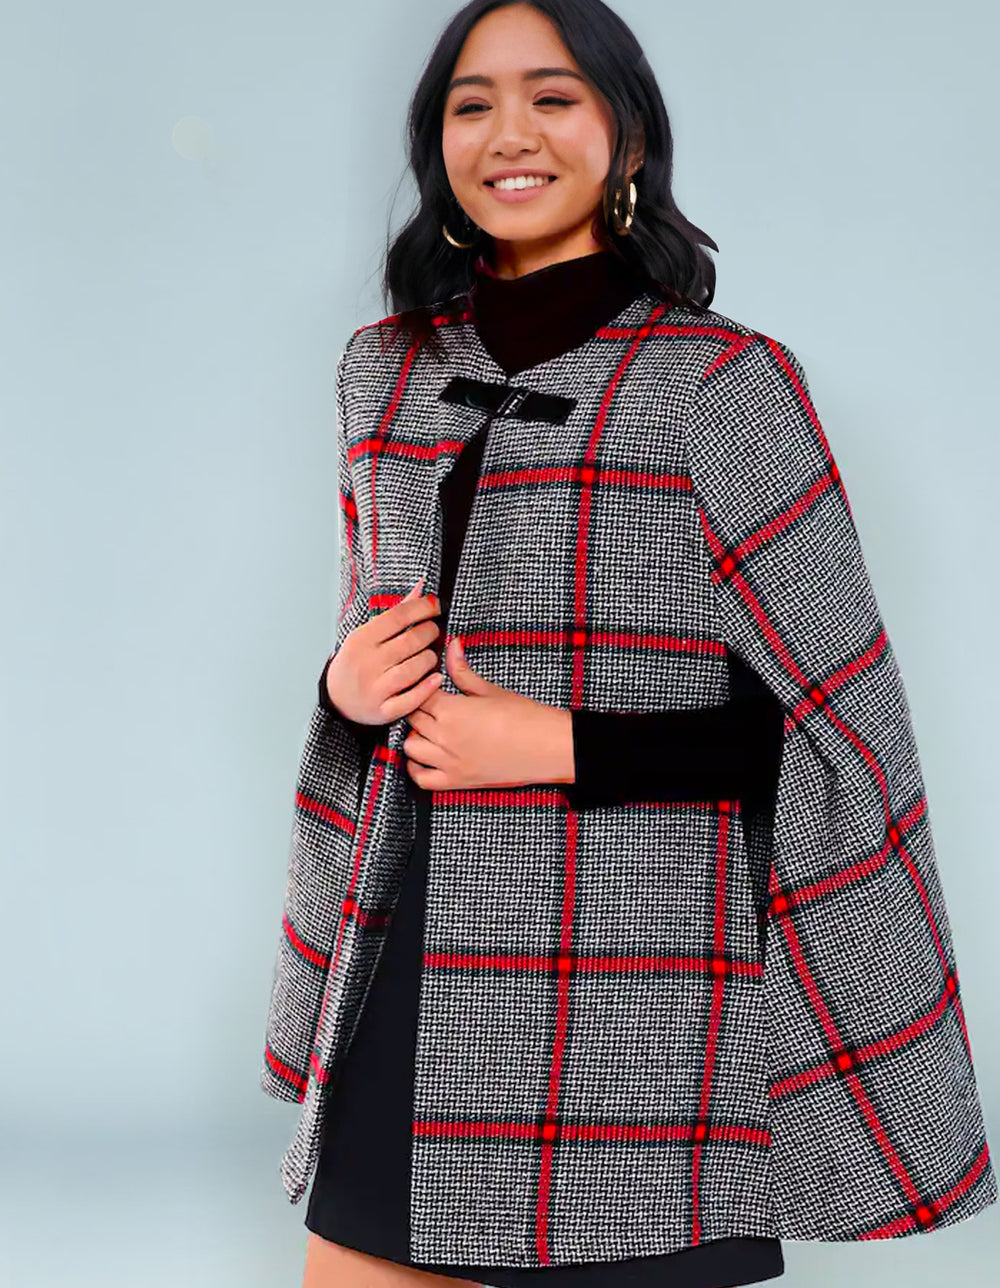 Woman wearing the Caribou Cape sewing pattern from Our Lady of Leisure on The Fold Line. A cape pattern made in boiled wool, felted wool, tweed, flannel or “Bonded” boucle fabrics, featuring a frog clasp closure, non-lined, round neck and front slits for 